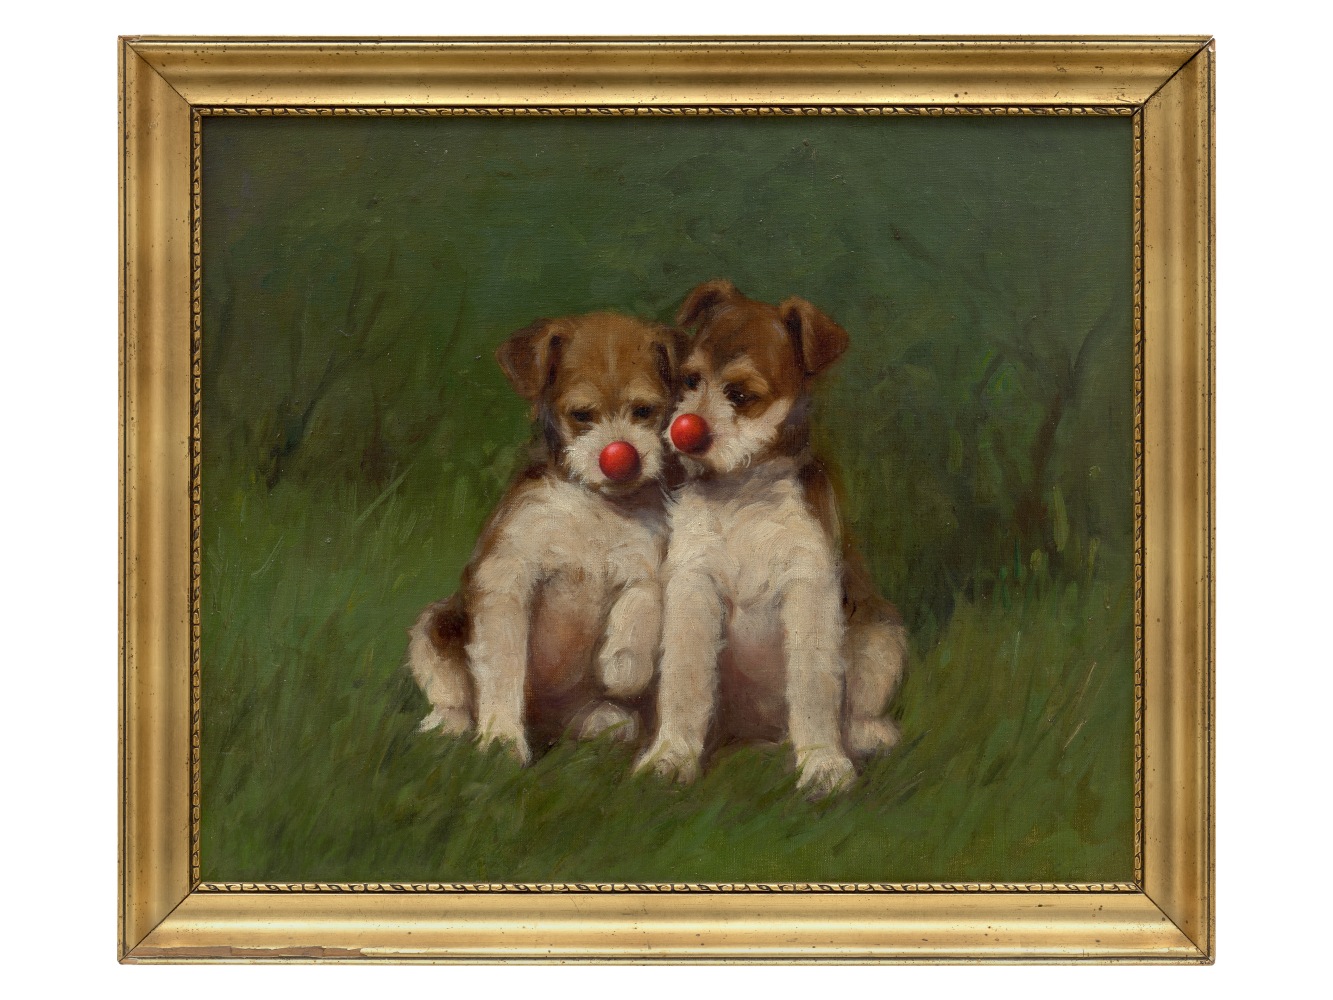 Hans-Peter Feldmann

Two puppies with red noses

Oil on linen, framed

23 x 27 inches (58.5 x 68.5 cm)

HPF 575